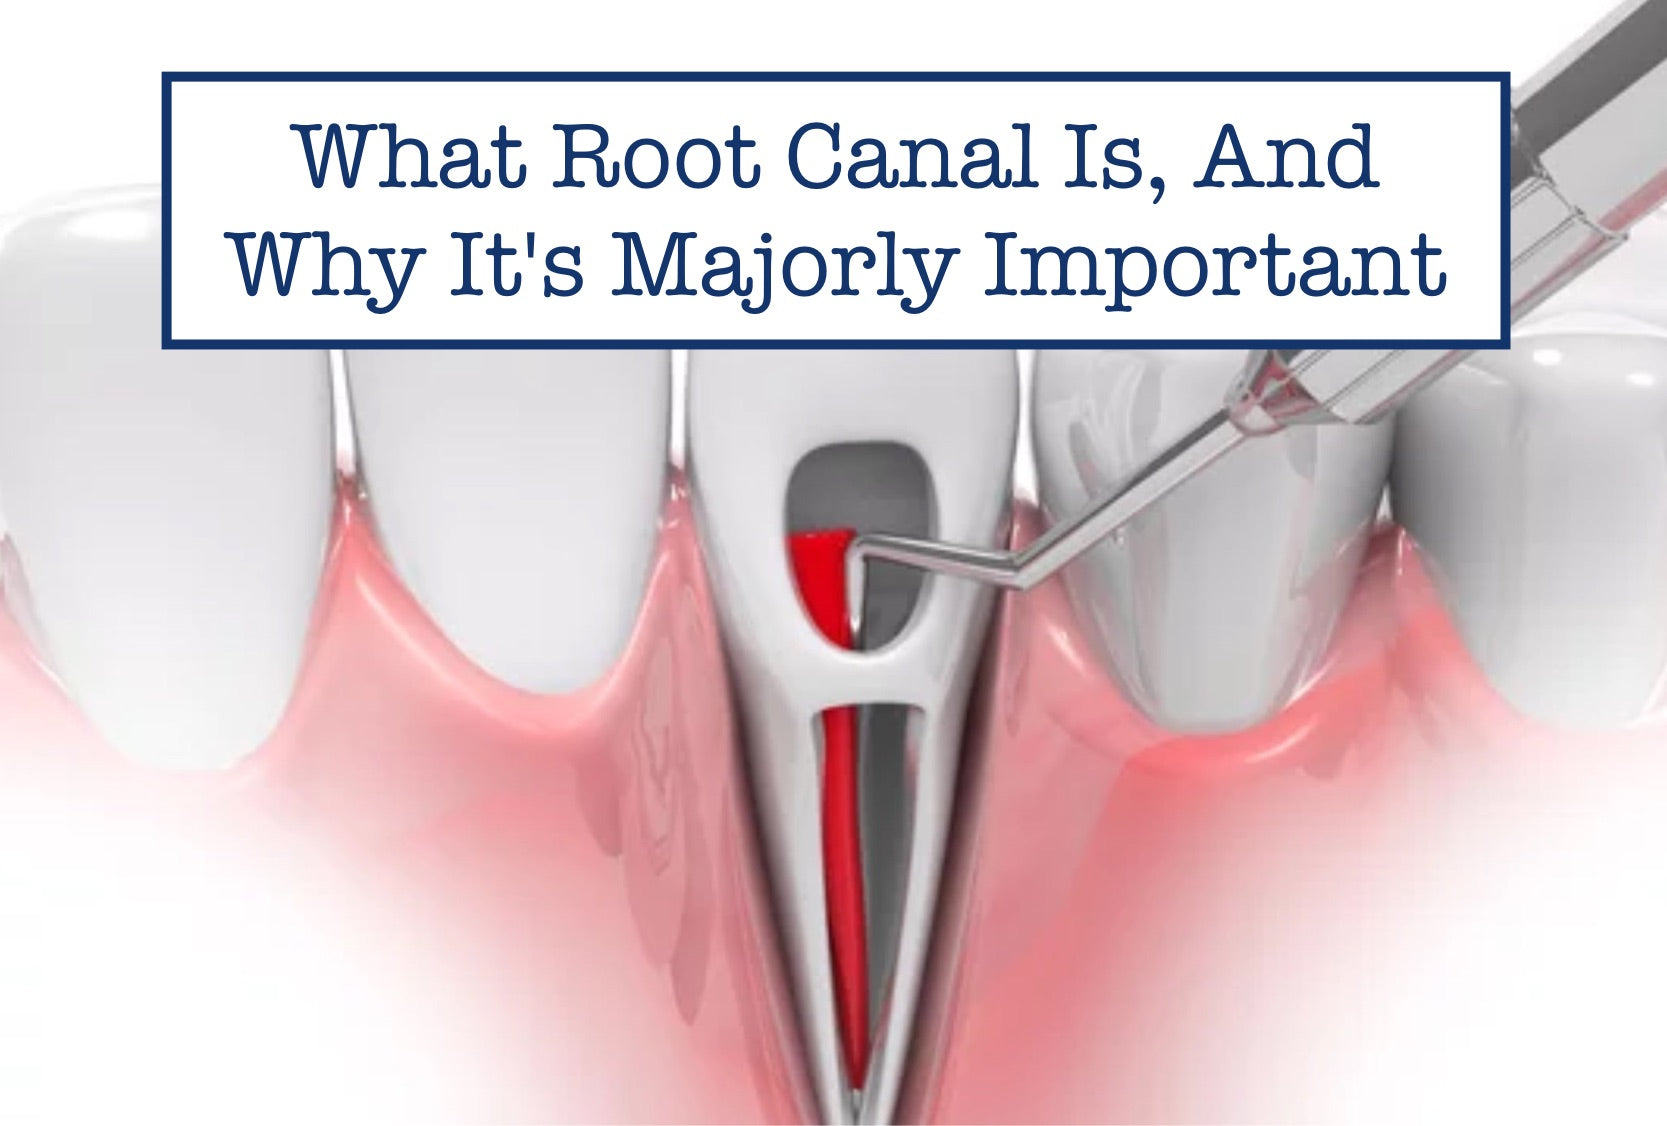 What Root Canal Is, And Why It's Majorly Important